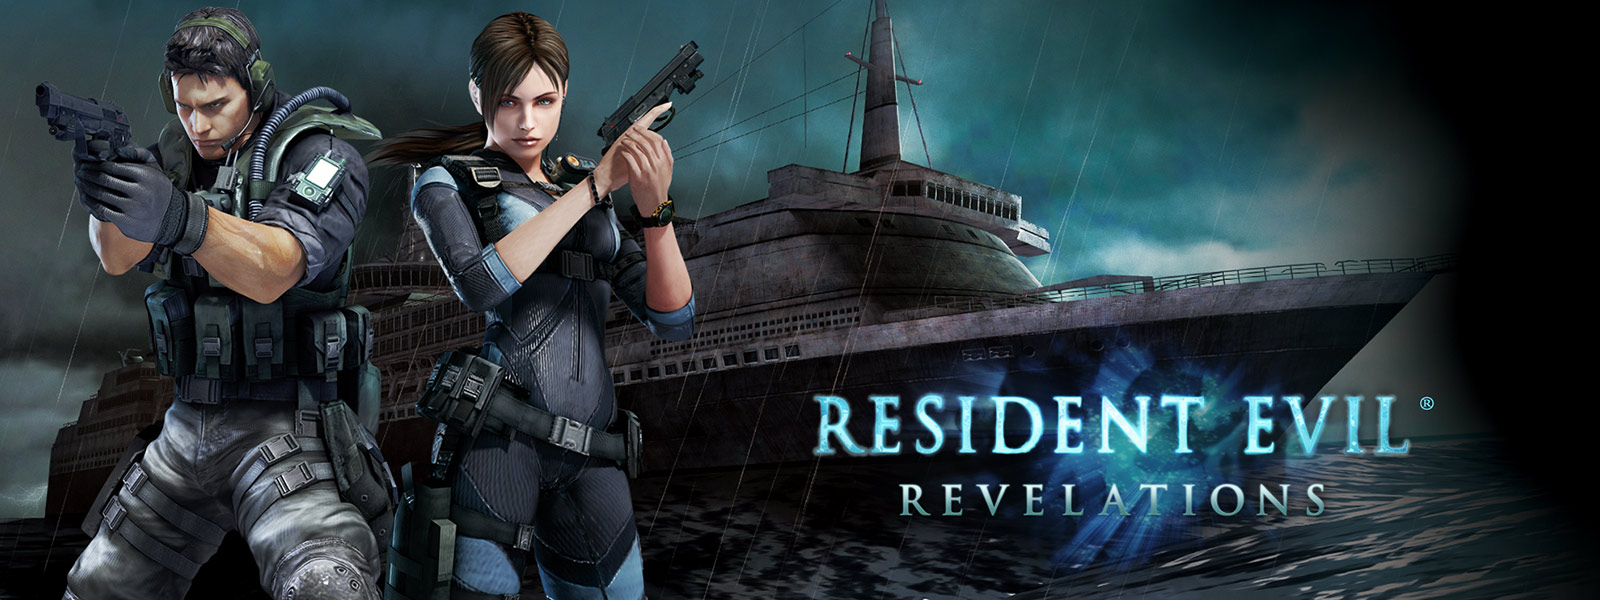 Resident Evil Revelations, two characters holding pistols in front of a ghostly looking cruise ship